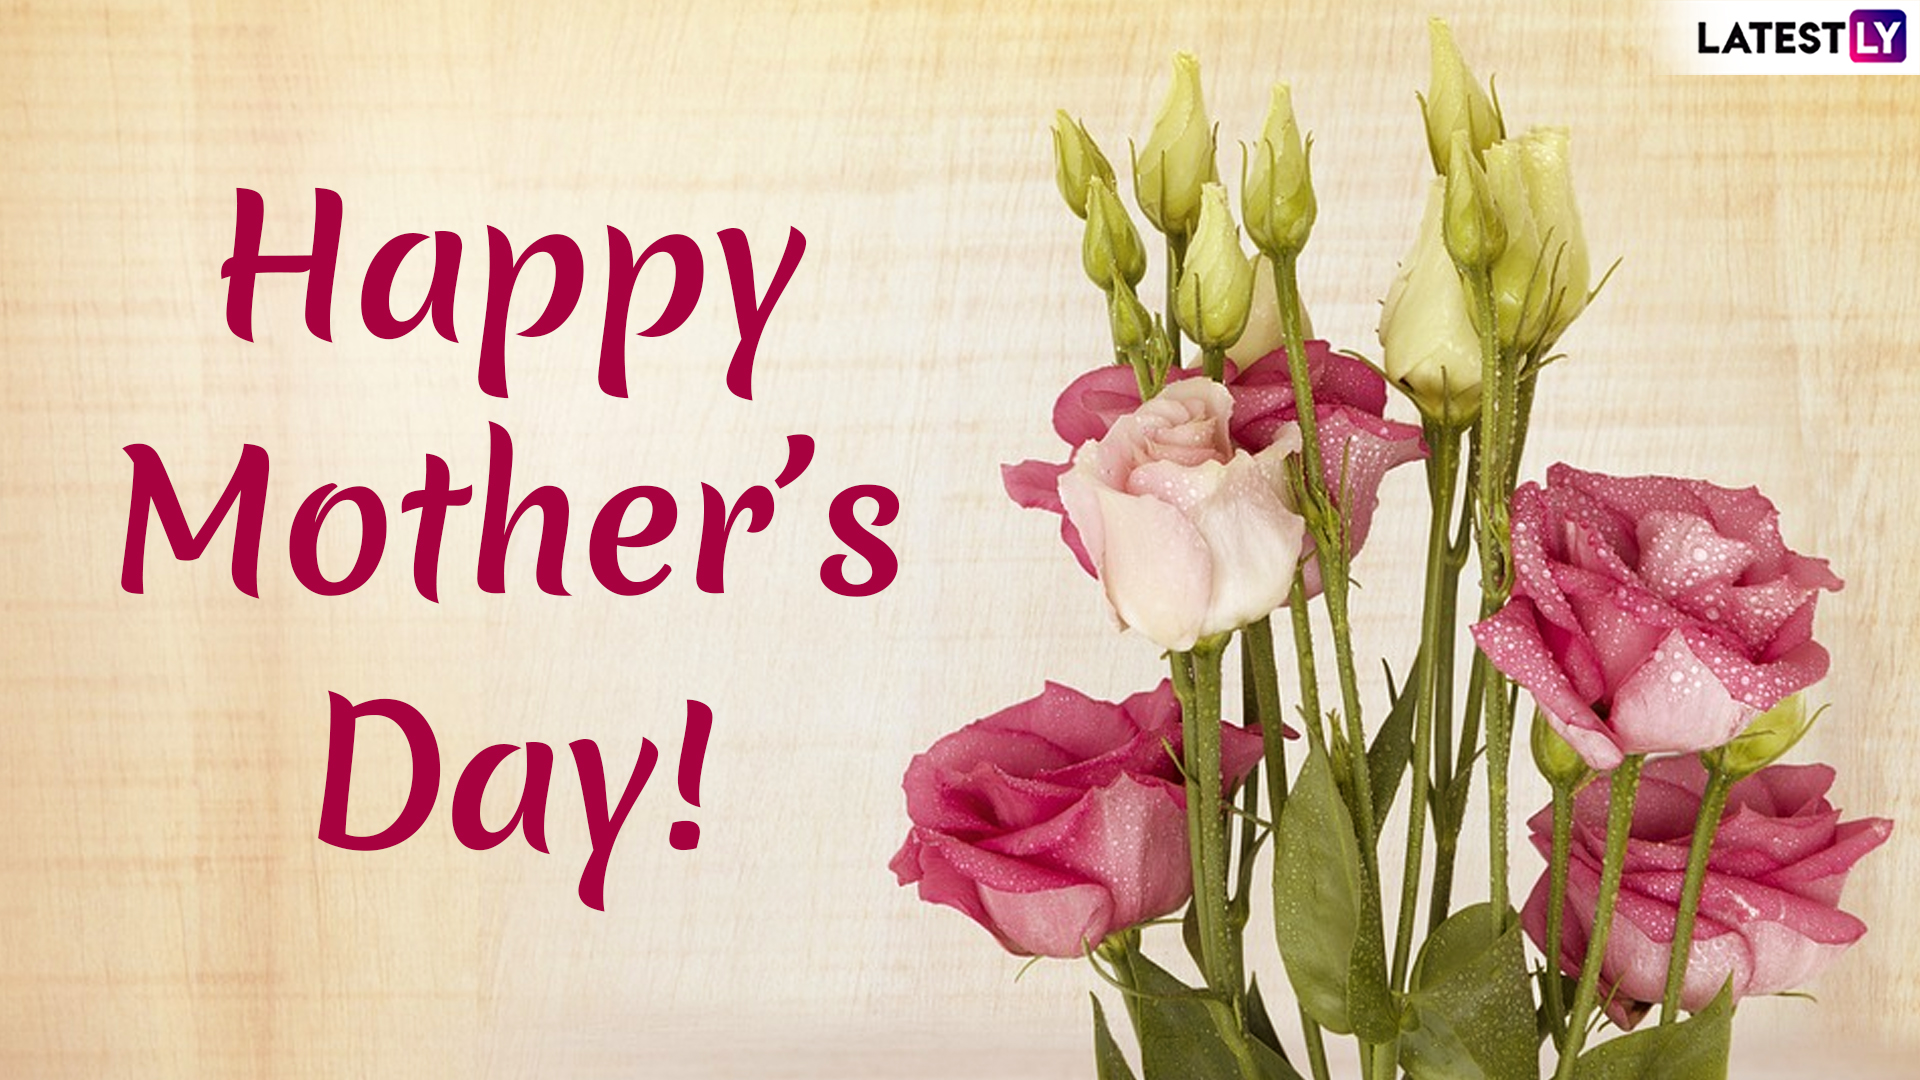 Happy Mothers Day Hd Images Quotes And Wallpapers For Free Download Online Send Mothers Day 